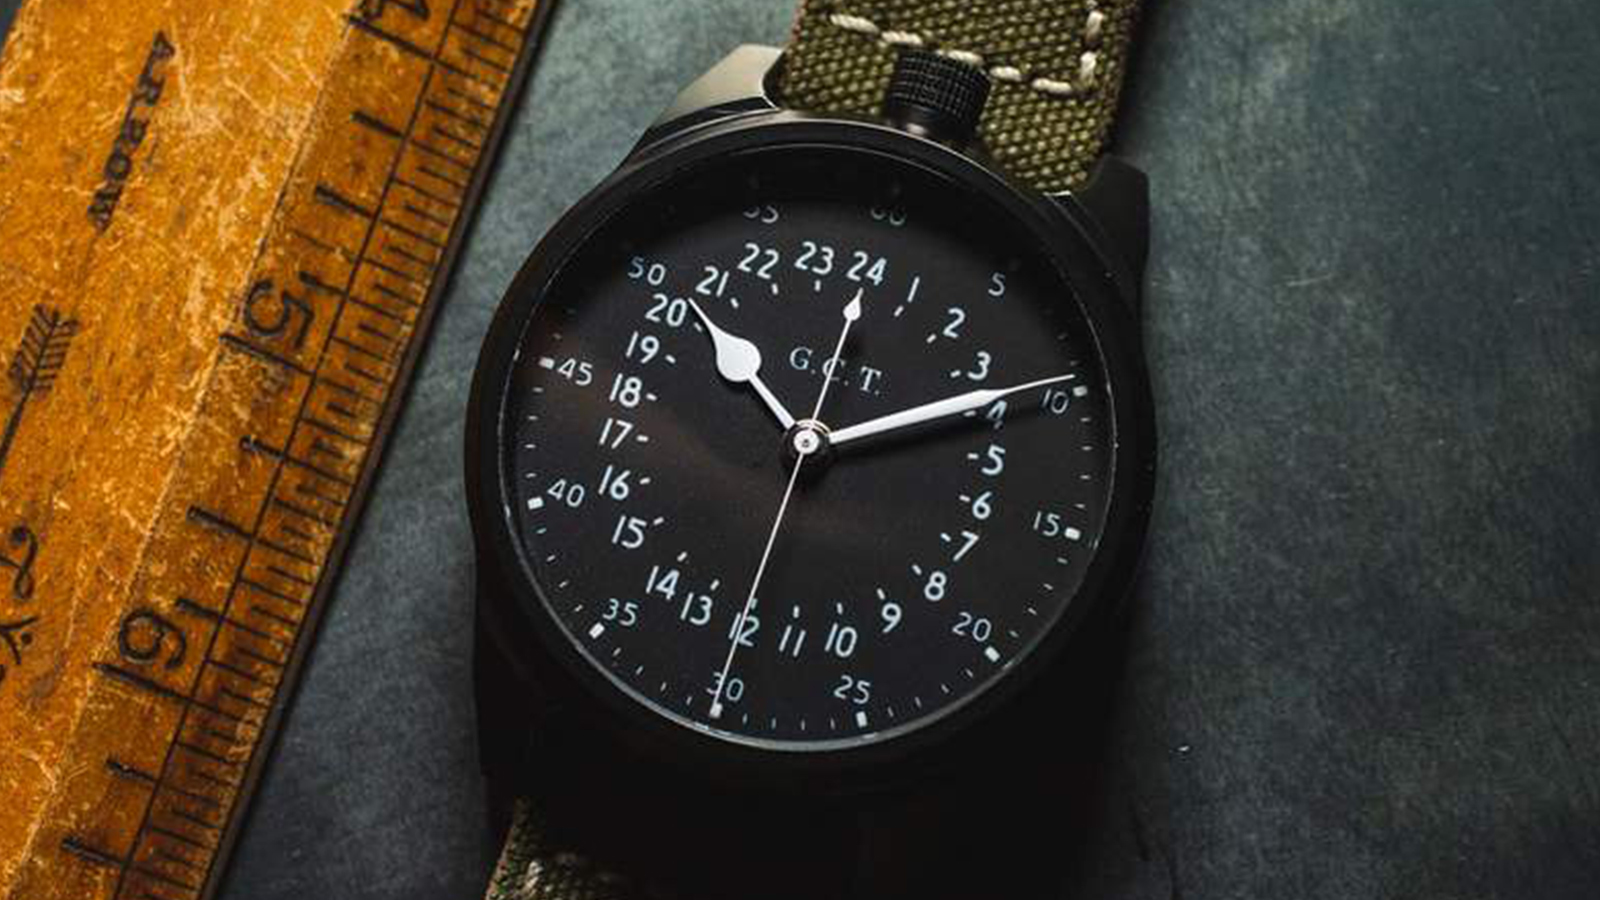 Vortic Military Edition Watch